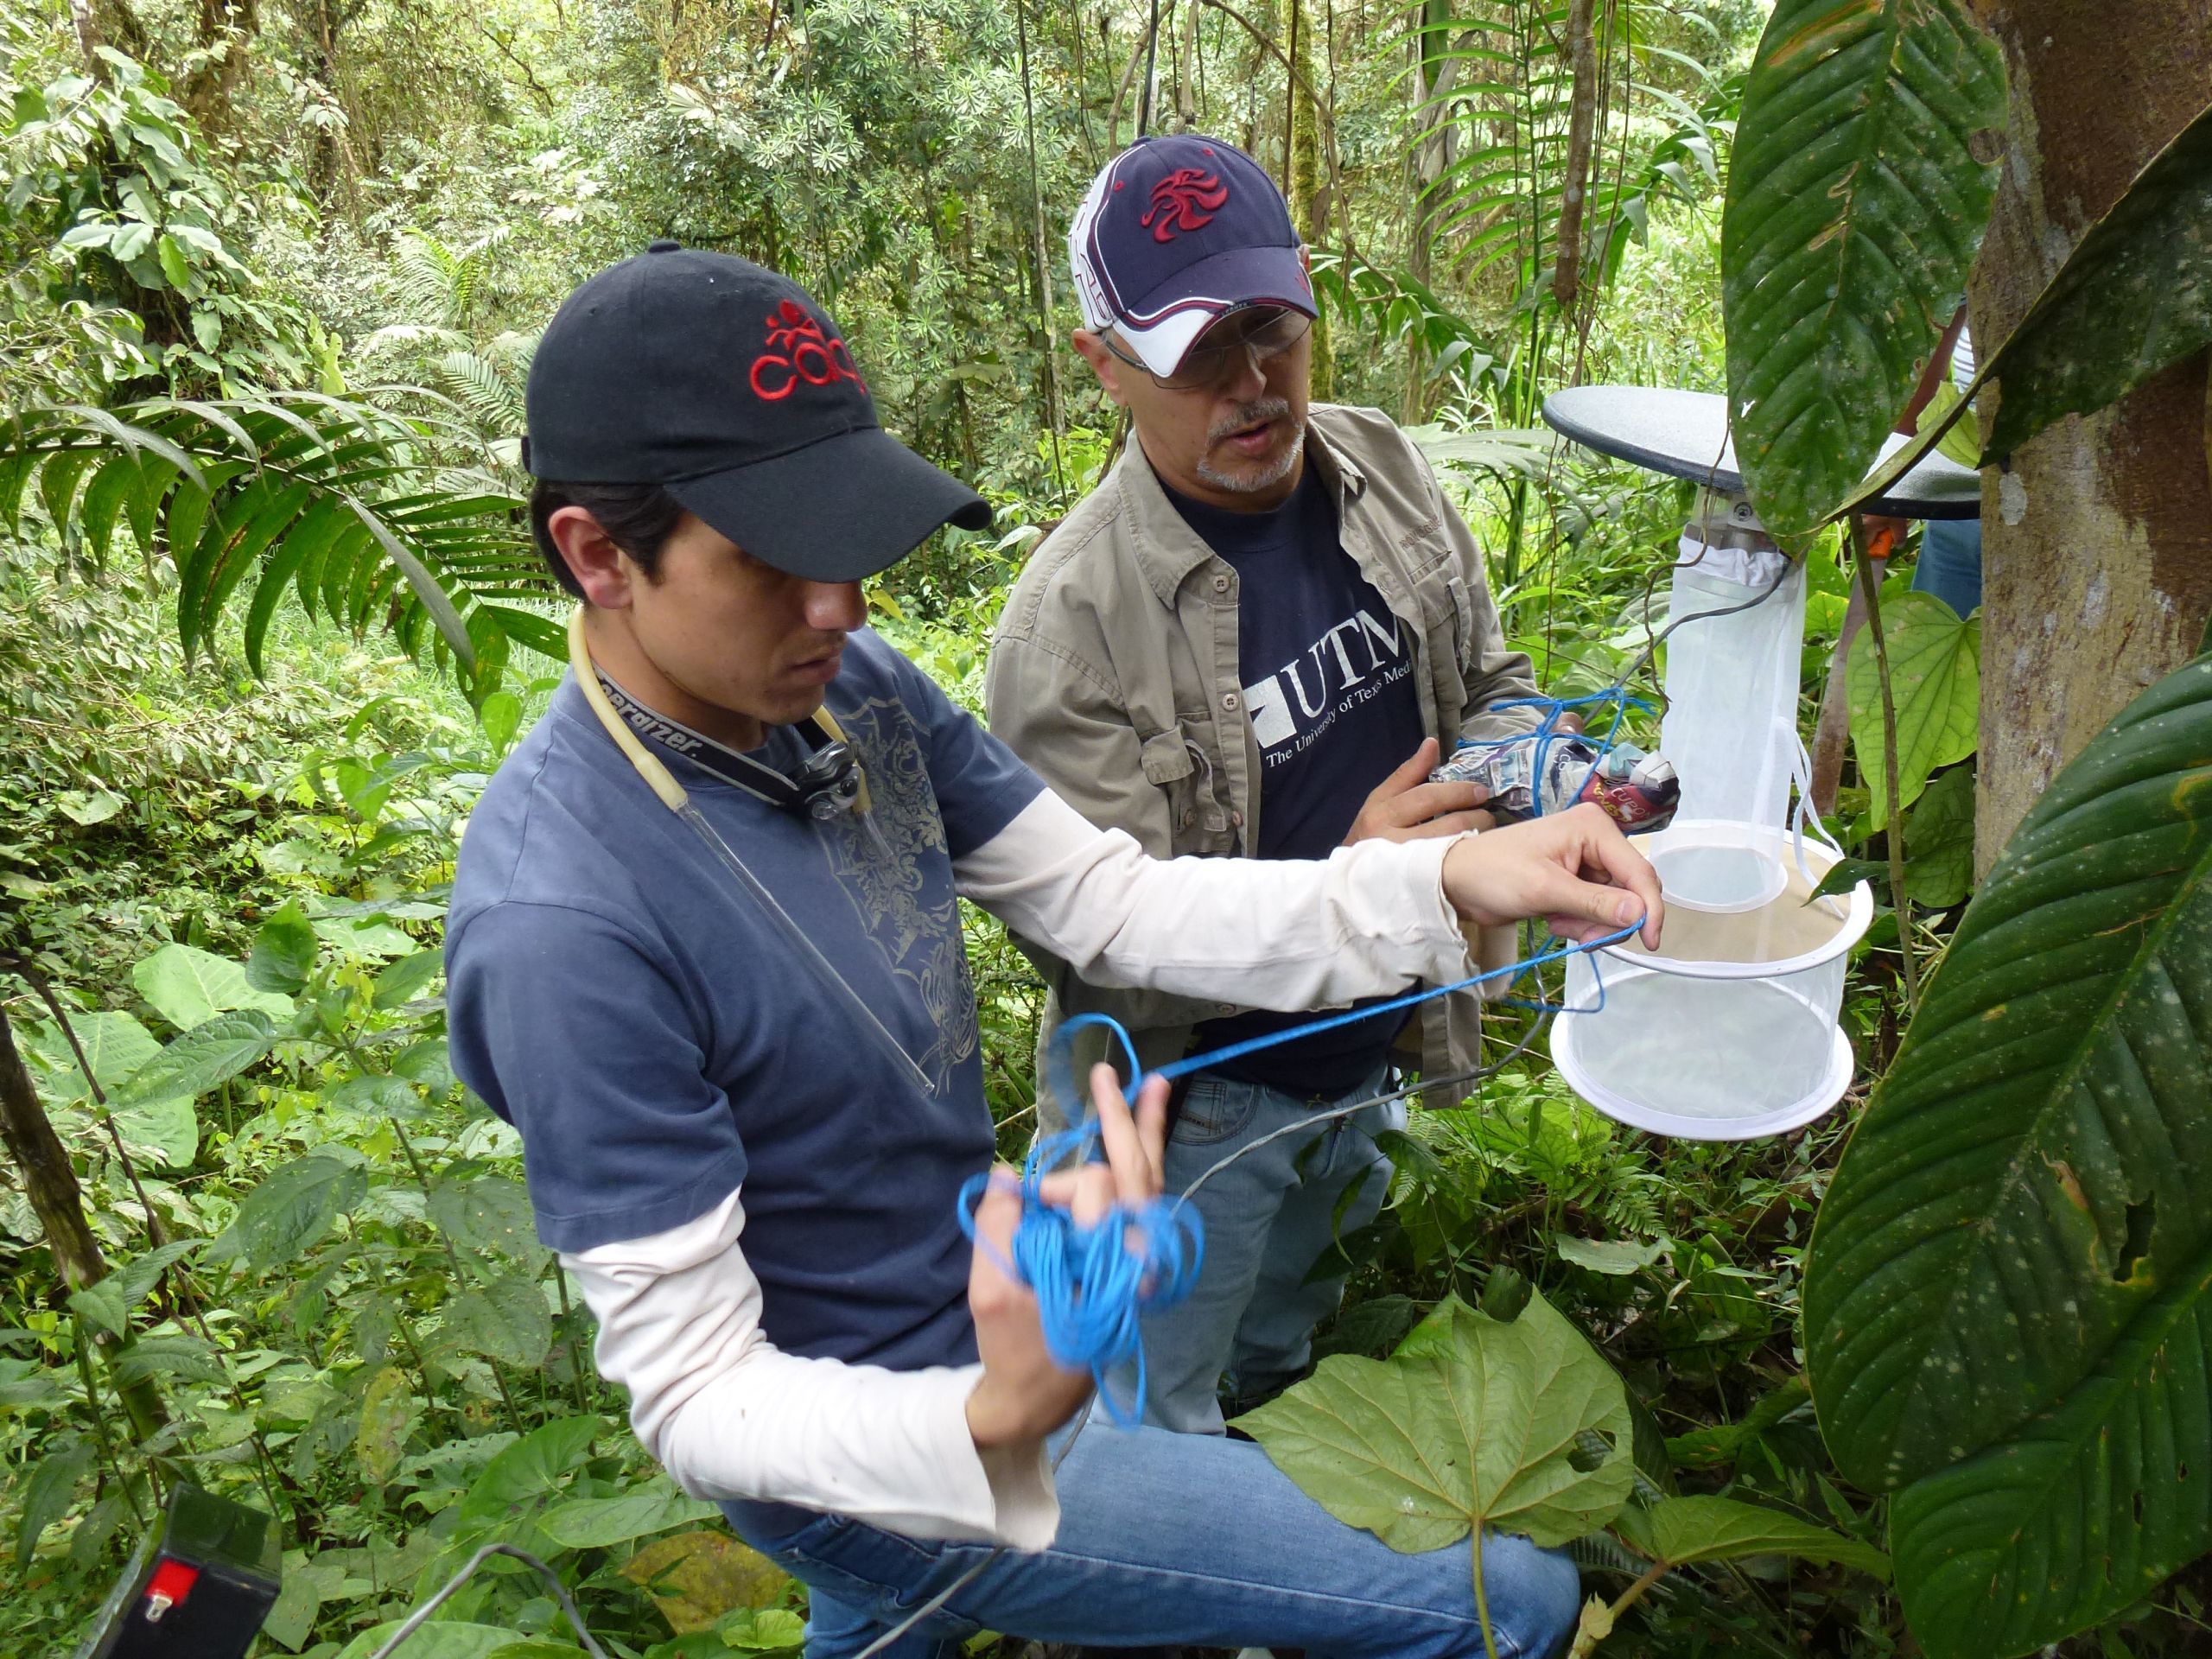 Juan Carlos setting up traps to collect mosquitoes and identify potential disease vectors in Ecuador, within the Amazon. Image courtesy of Juan Carlos Navarro. Ecuador, undated.